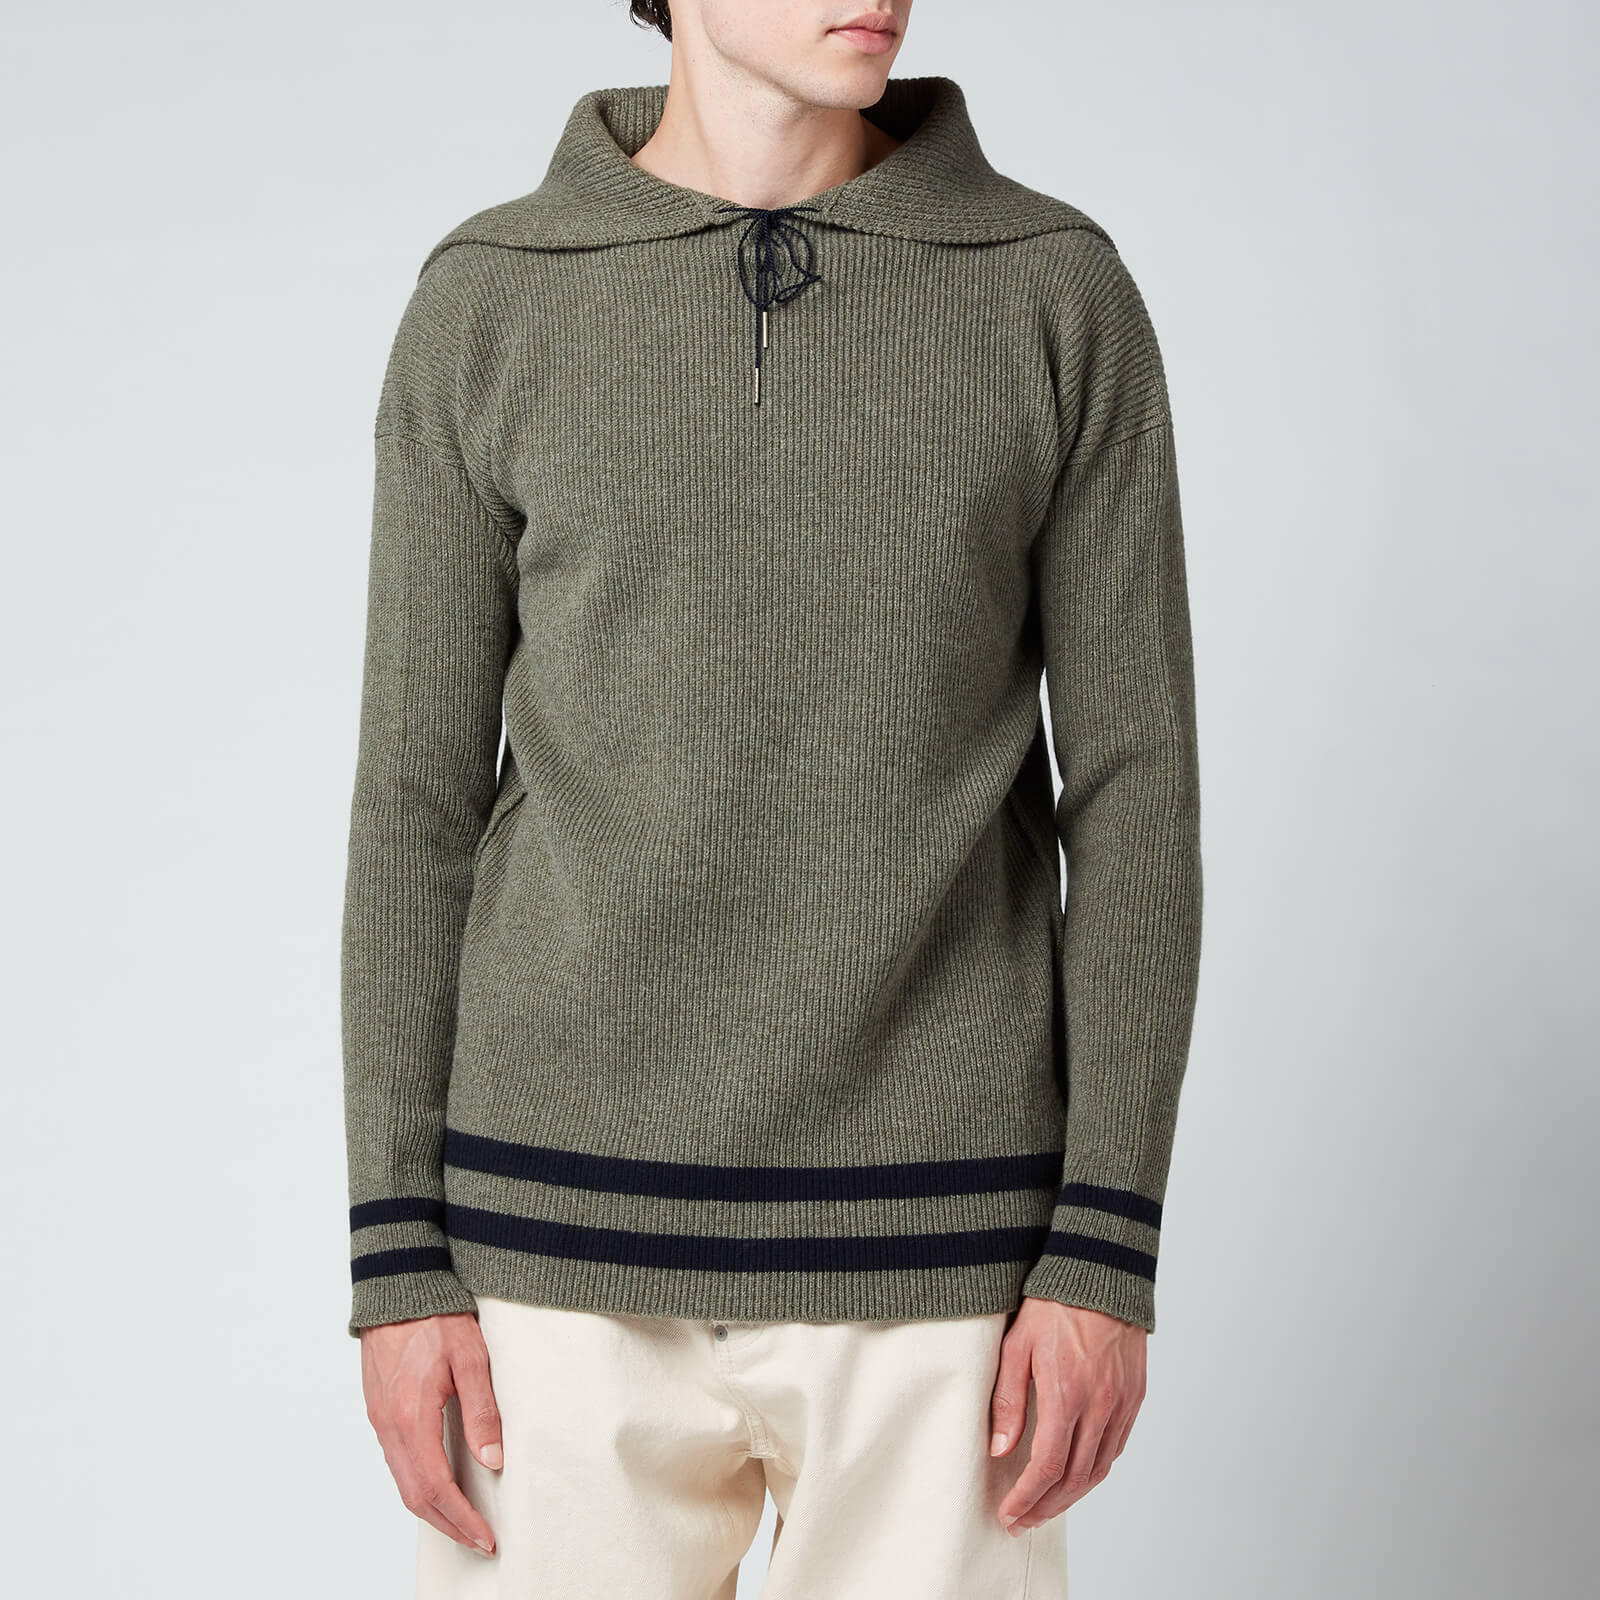 Maison Margiela Men's Relaxed Collar Pullover Hoodie - Military/Navy - S